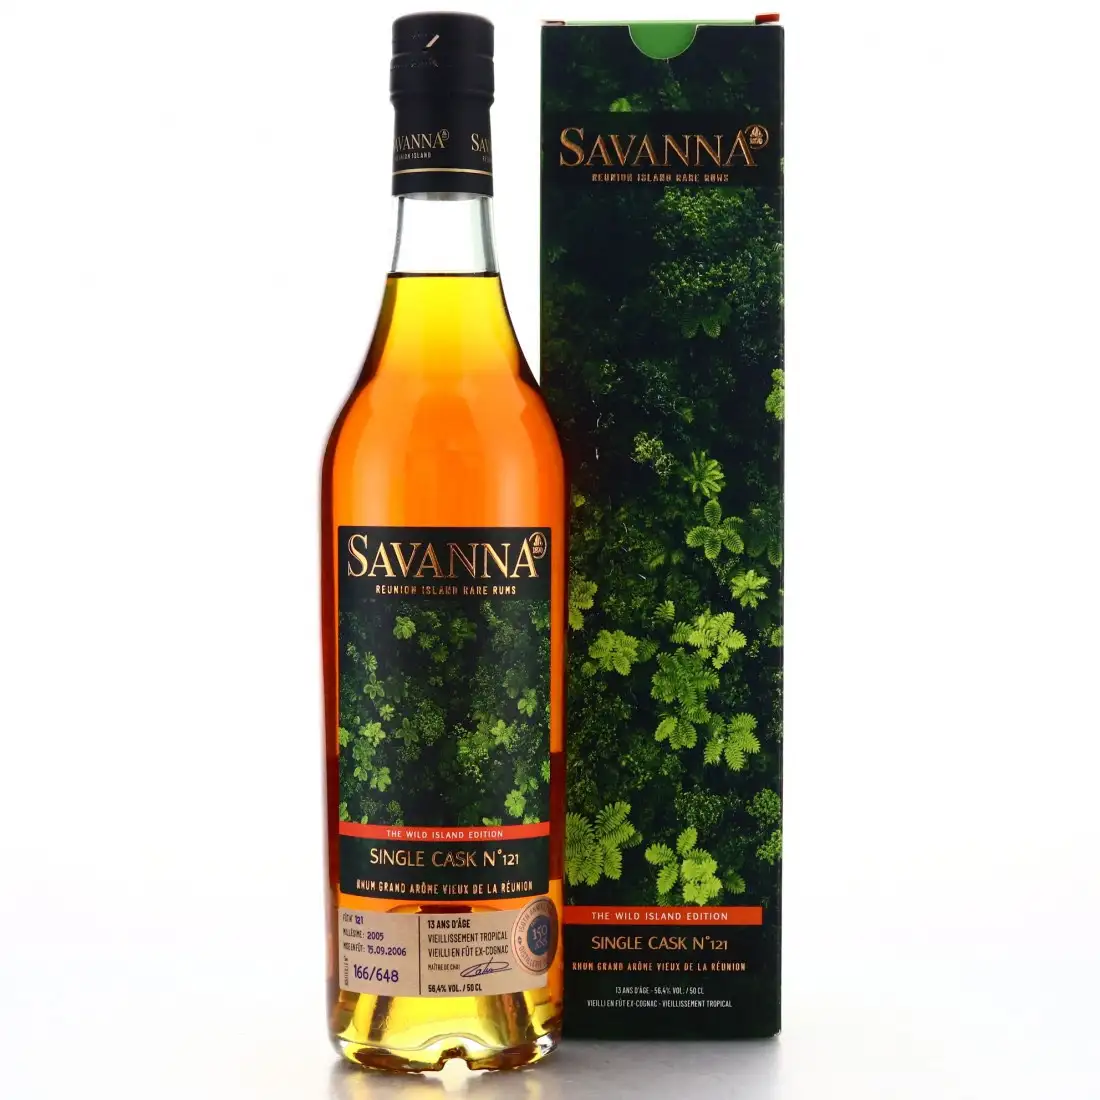 Image of the front of the bottle of the rum The Wild Island Edition - Rhum Grand Arôme Vieux